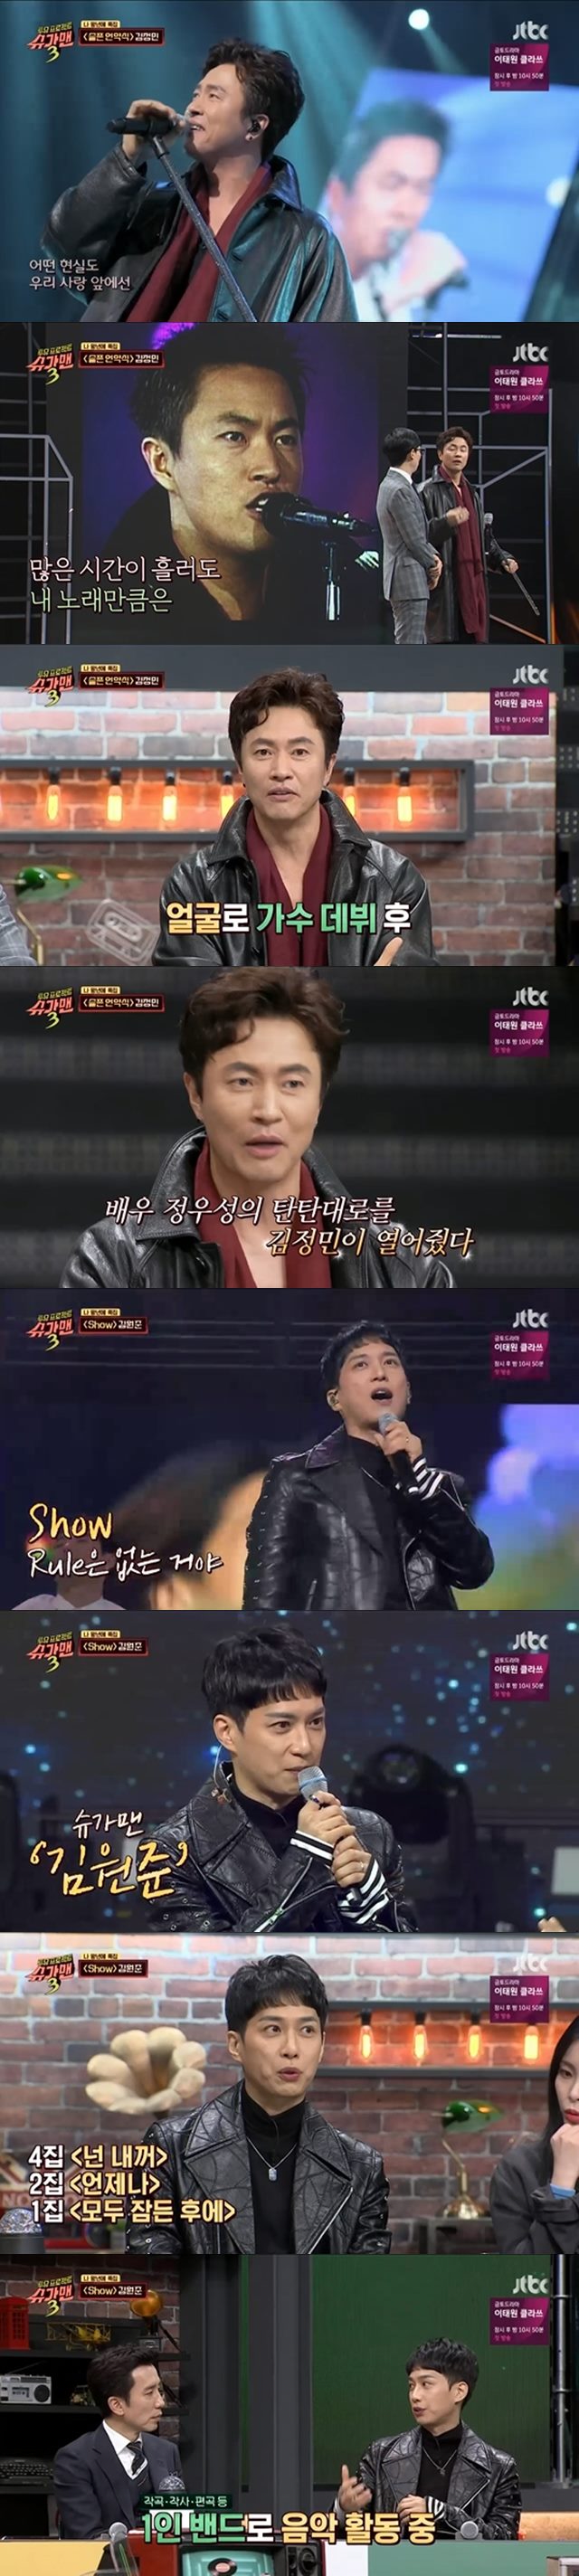 Kim Jung-min and Kim Won Joon took the stage as they were in the 1990s.Singer Kim Jung-min and Kim Won Joon were summoned as Suga men in JTBC Tuyu Project - Suga Man 3 broadcast on the 31st.Kim Jung-min appeared as the representative hit song Sad Covenant Ceremony.When I sing, I have my own iron rule, he said, surprised everyone with the same singing ability as in the 1990s.Even if a lot of time passes, I want to sing the song as the original sound as the CD. The visual confidence was great. He made his debut as a singer because of his handsome face.Okay, he said he was going to the miniseries. Asphalt man.Jung Woo-sung, Lee Byung-hun. Jung Woo-sung I am going to play the role of the bishop, It is not my way.My way is music, he said proudly.He also laughed, adding, I think Kim Jung-min opened the Jung Woo-sung Tantan Road.Kim Won Joon leads as Aided Flower Singer; Kim Won Joon, who appeared on the show on the same day, was surprised by visuals like his 20s.His live skills were also admirable.There was also a story by Kim Won Joon that was a talented singer.Handsome looks are well known, but in fact Kim Won Joon is a singer who can write and write both.After everyone is asleep, Always, You Are My were Kim Won Joons own songs.The two also told of their plans to continue their musical careers in the future: first, Kim Jung-min said, After marriage, the child was born right away.When I helped with childcare and housework, the flow of the music industry changed a lot, and the style changed and there was no one to look for. However, if I was practicing, I was thinking that my time would come someday. Kim Won Joon, who said, I was suddenly loved and my music confidence fell. Kim Won Joon, who revealed the reason for the singers rest, said, I want to work with many people by writing many songs like Toy Storys Yoo Hee-yeol.Its called the empty project. My dream is to be the second Toy Story.Photo = JTBC Broadcasting Screen